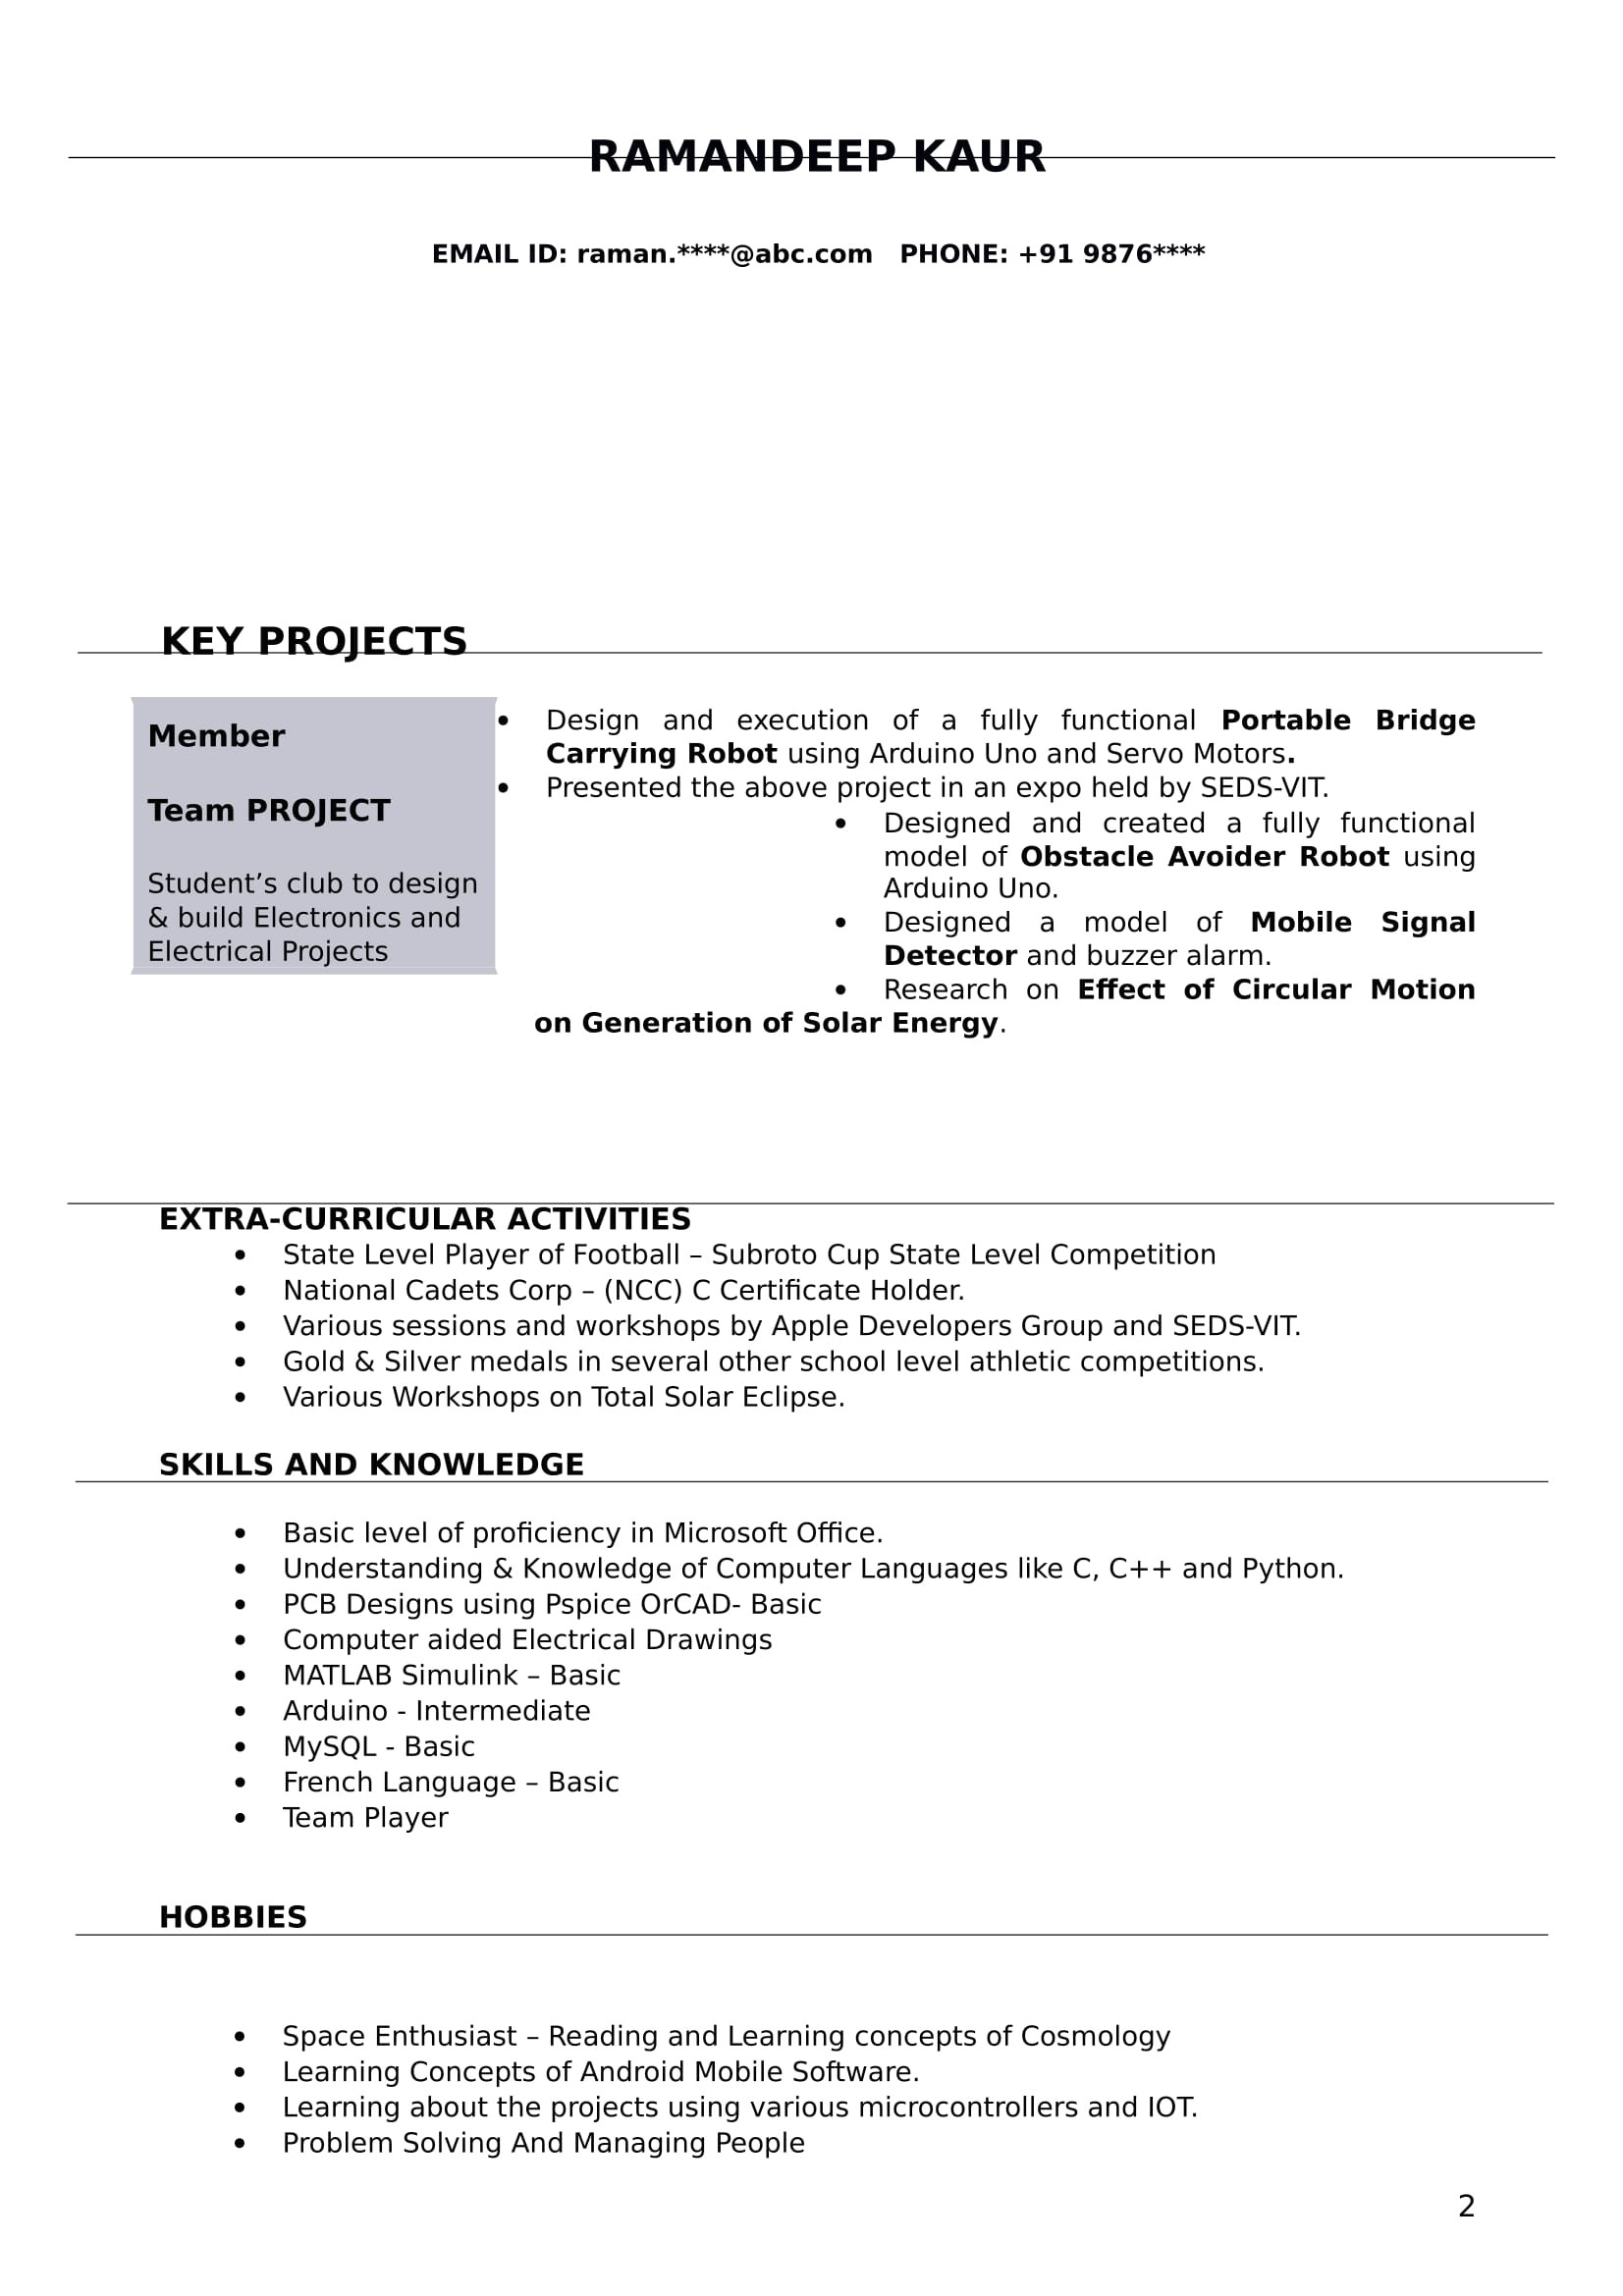 Resume Format For Diploma Freshers : FREE 40+ Fresher Resume Examples ...